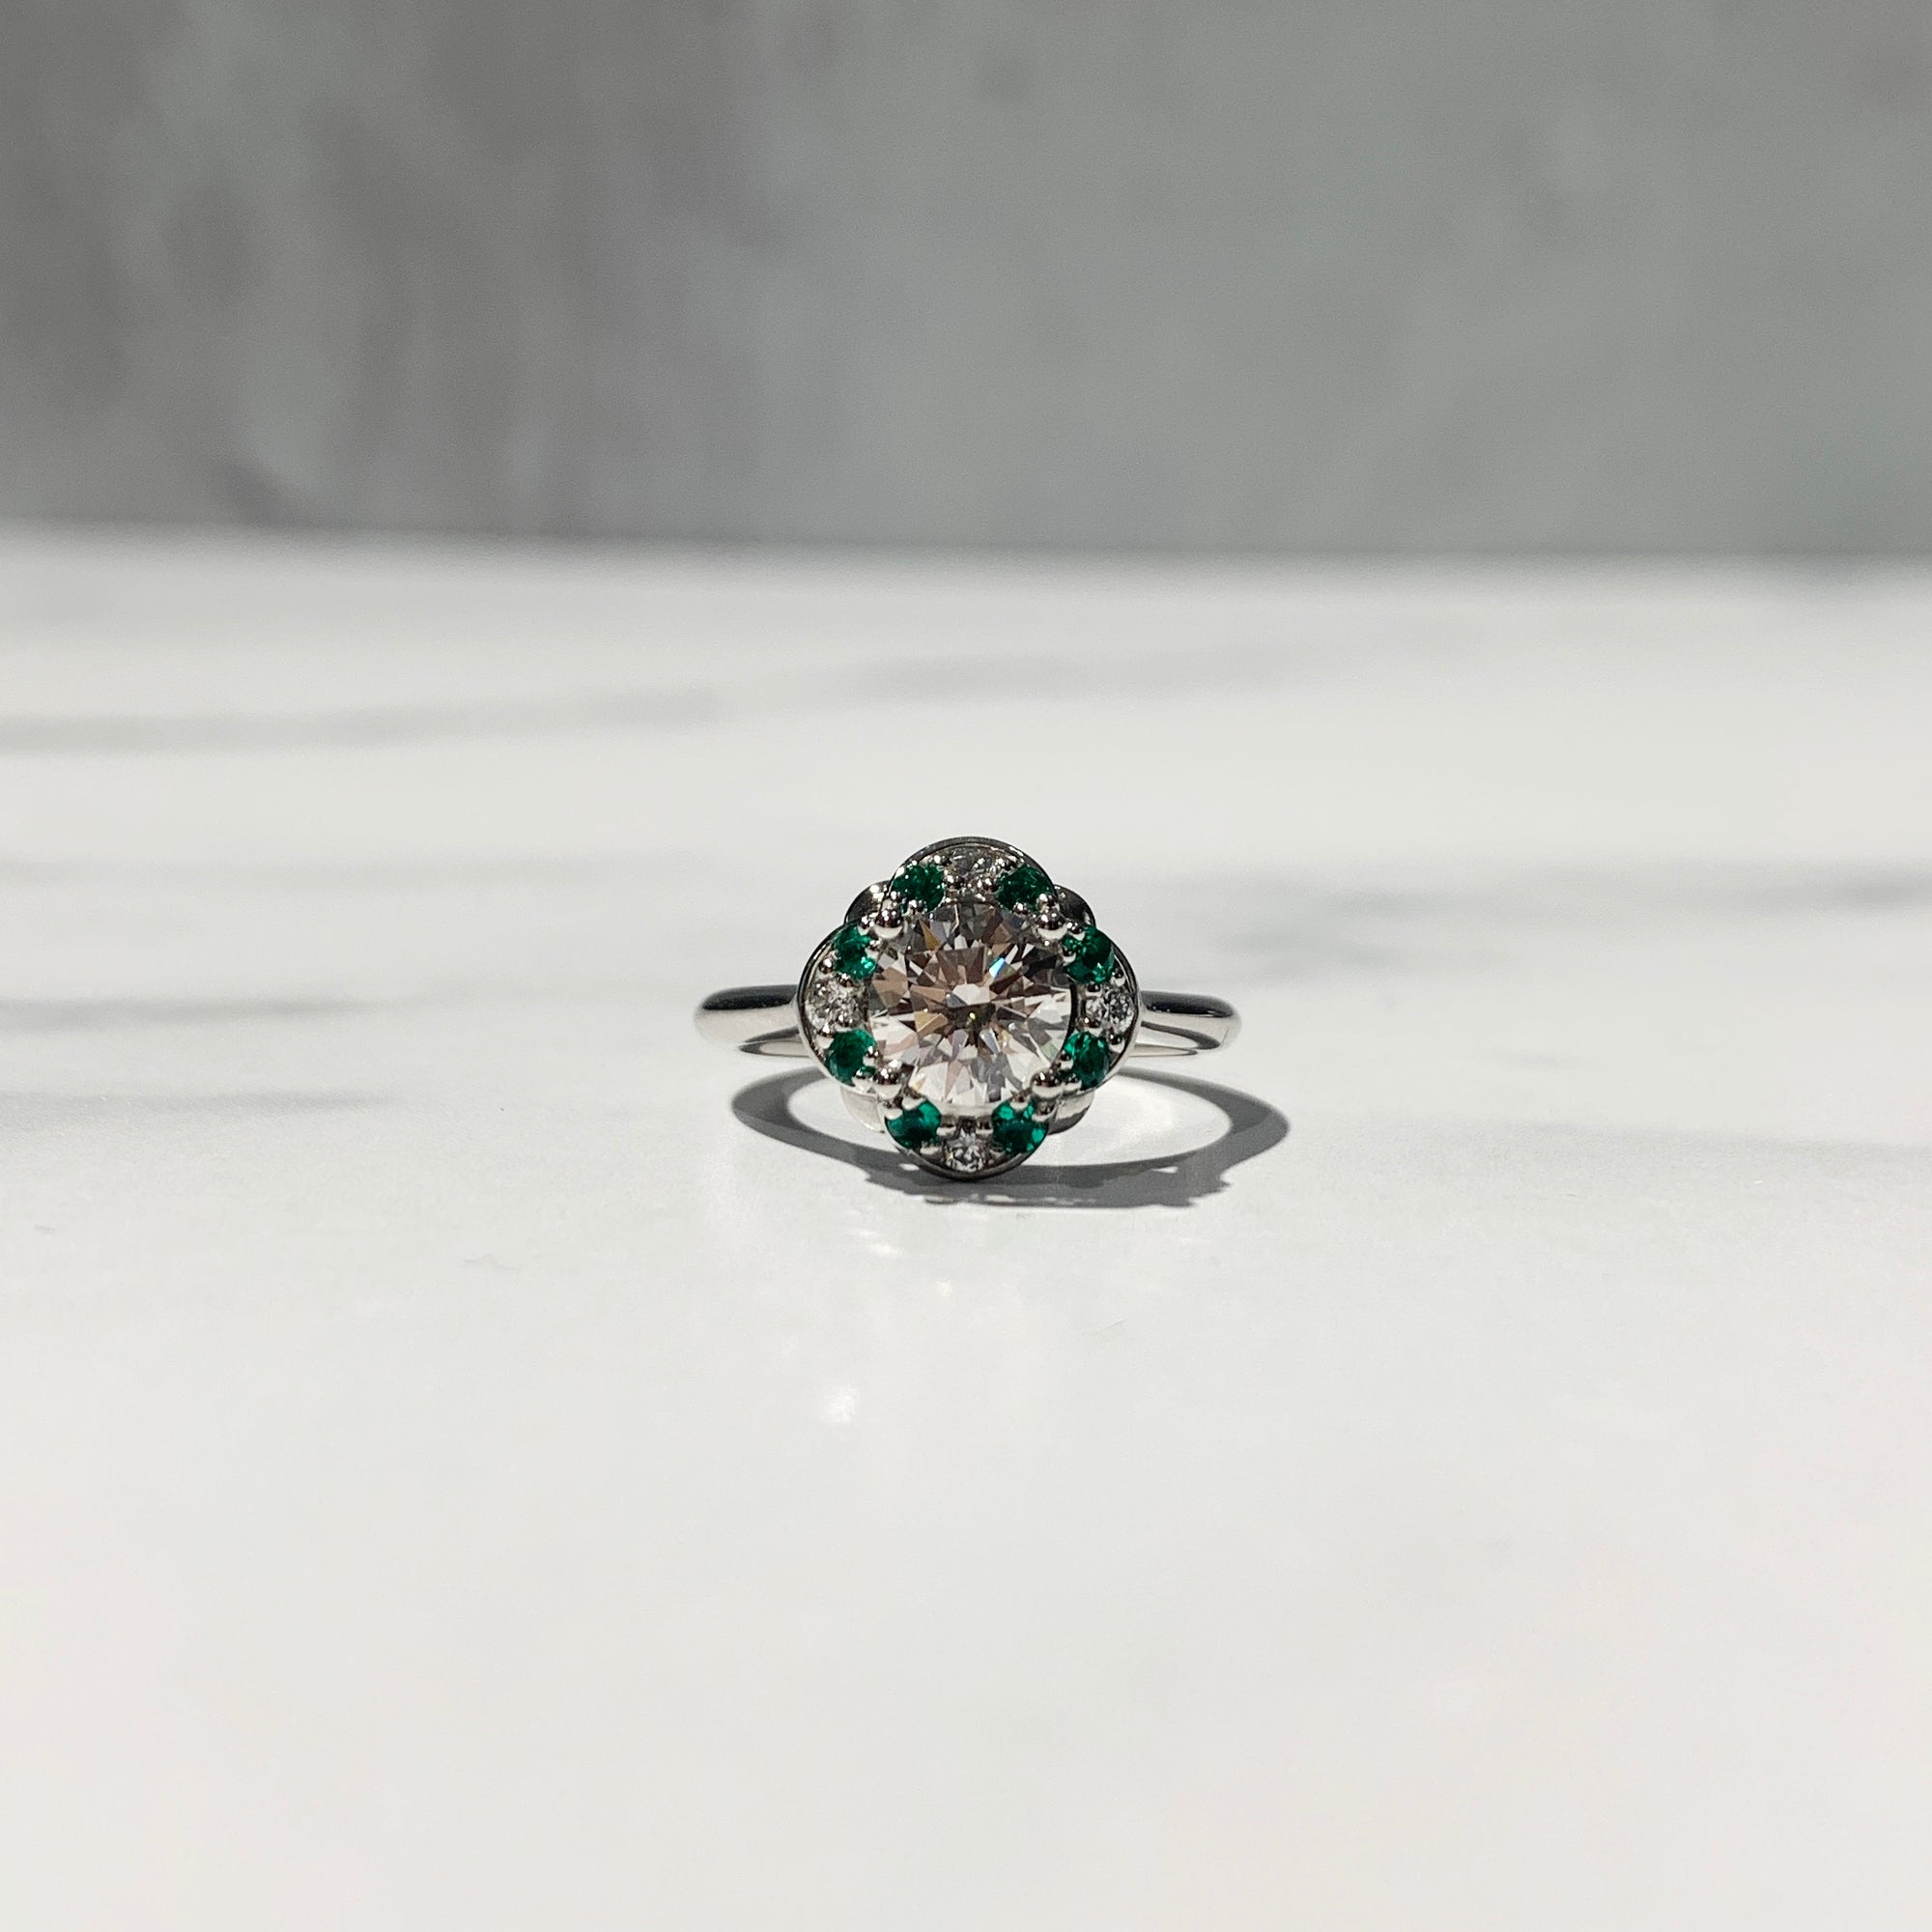 Halo engagement ring with emeralds and diamond halo